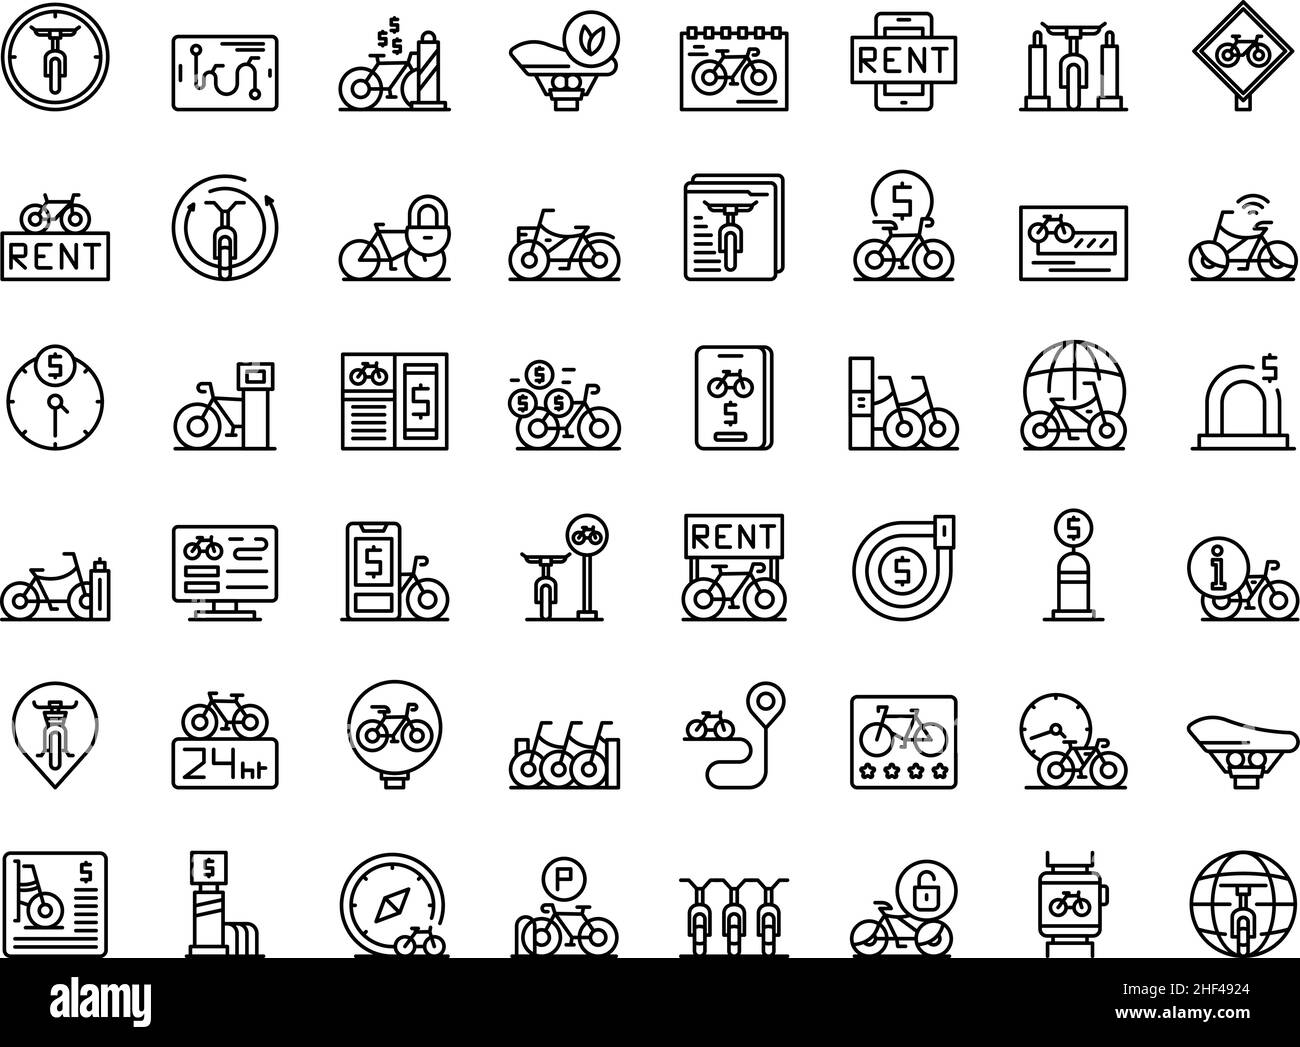 Bike sharing icons set outline vector. Bicycle station. City person Stock Vector